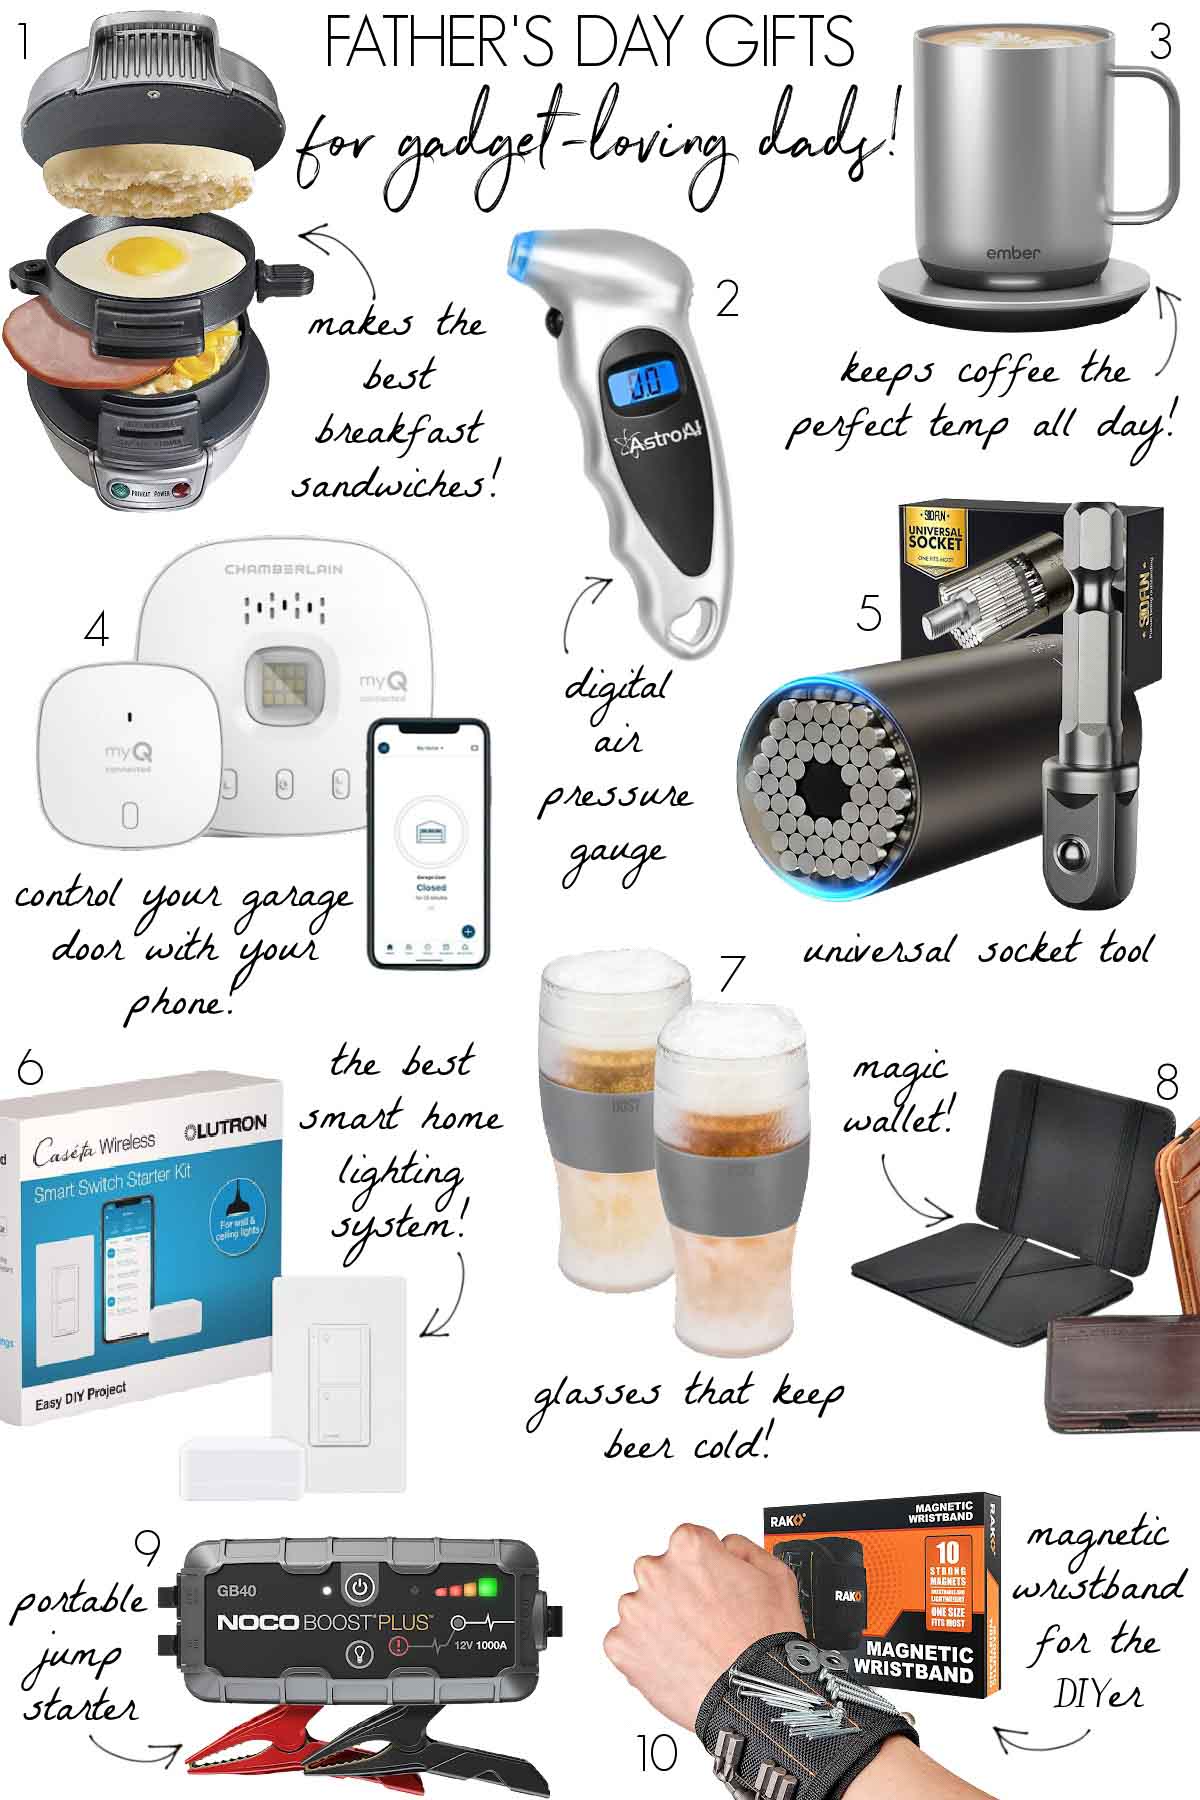 Father's Day gifts for gadget loving dads